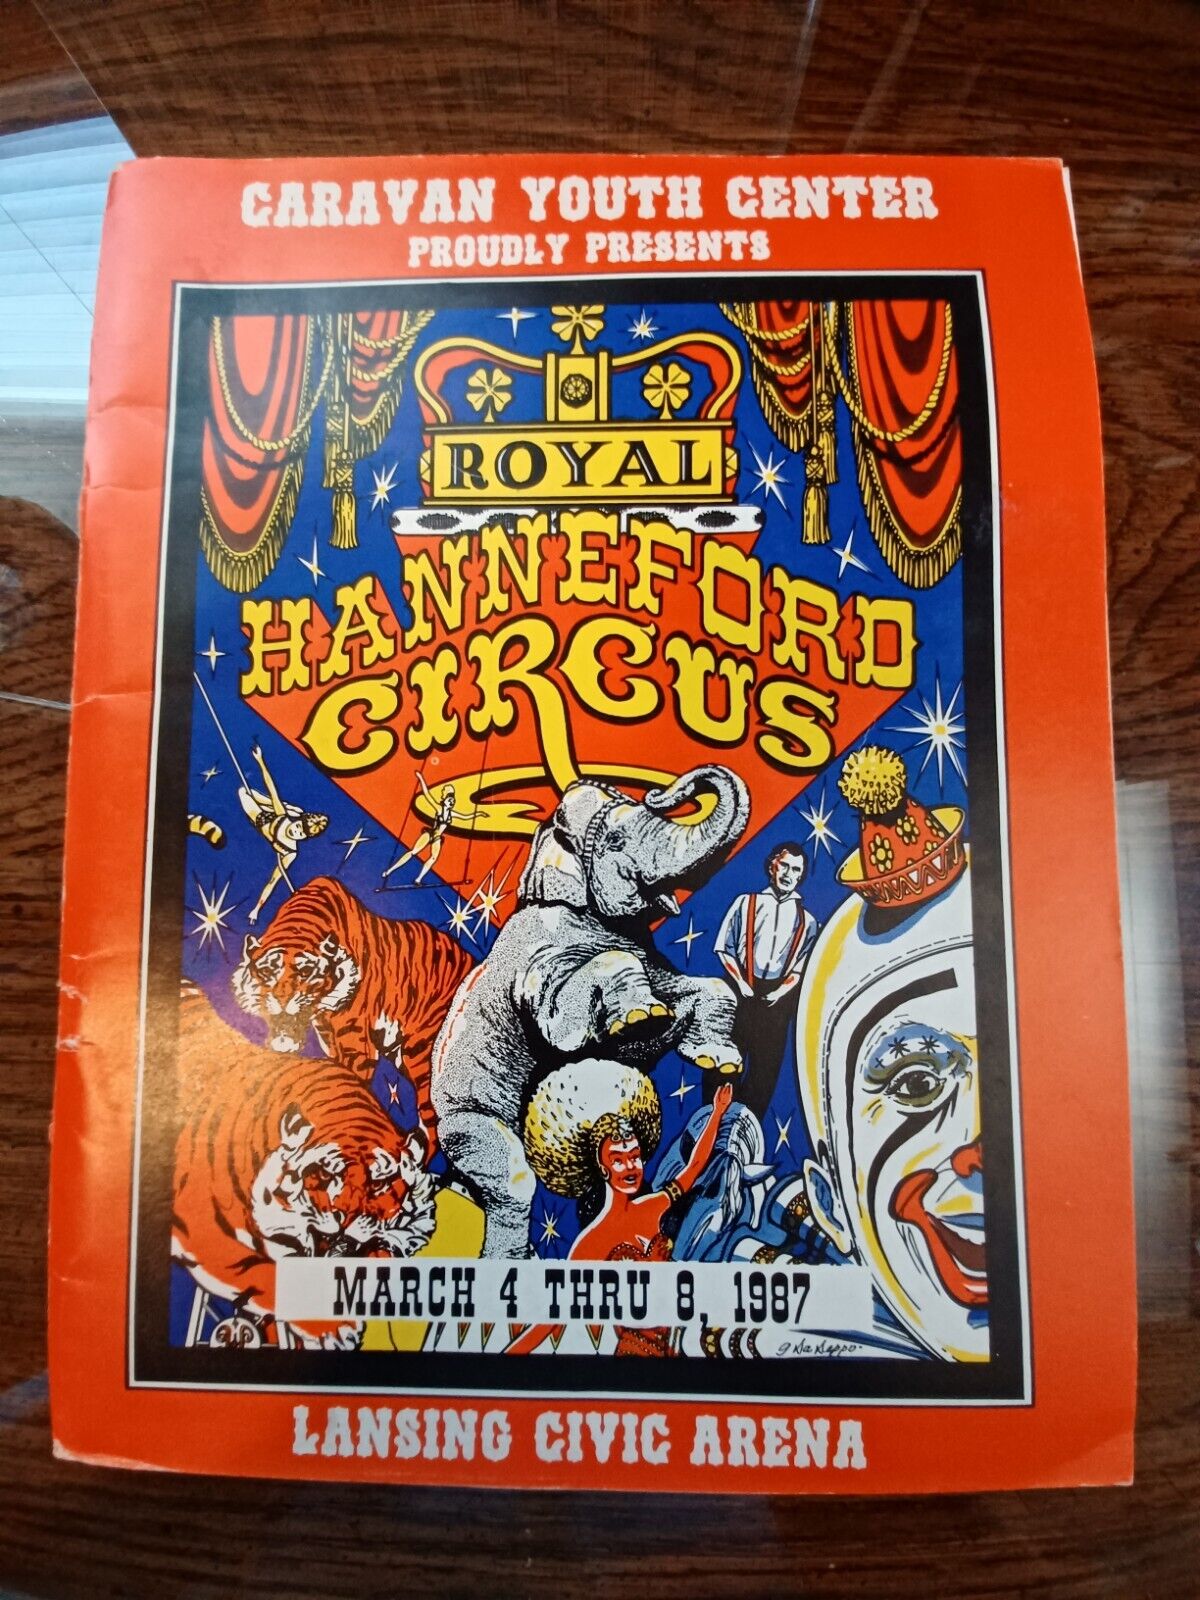 Caravan Youth Center - Royal Hanneford Circus Coloring Book and Program 1987